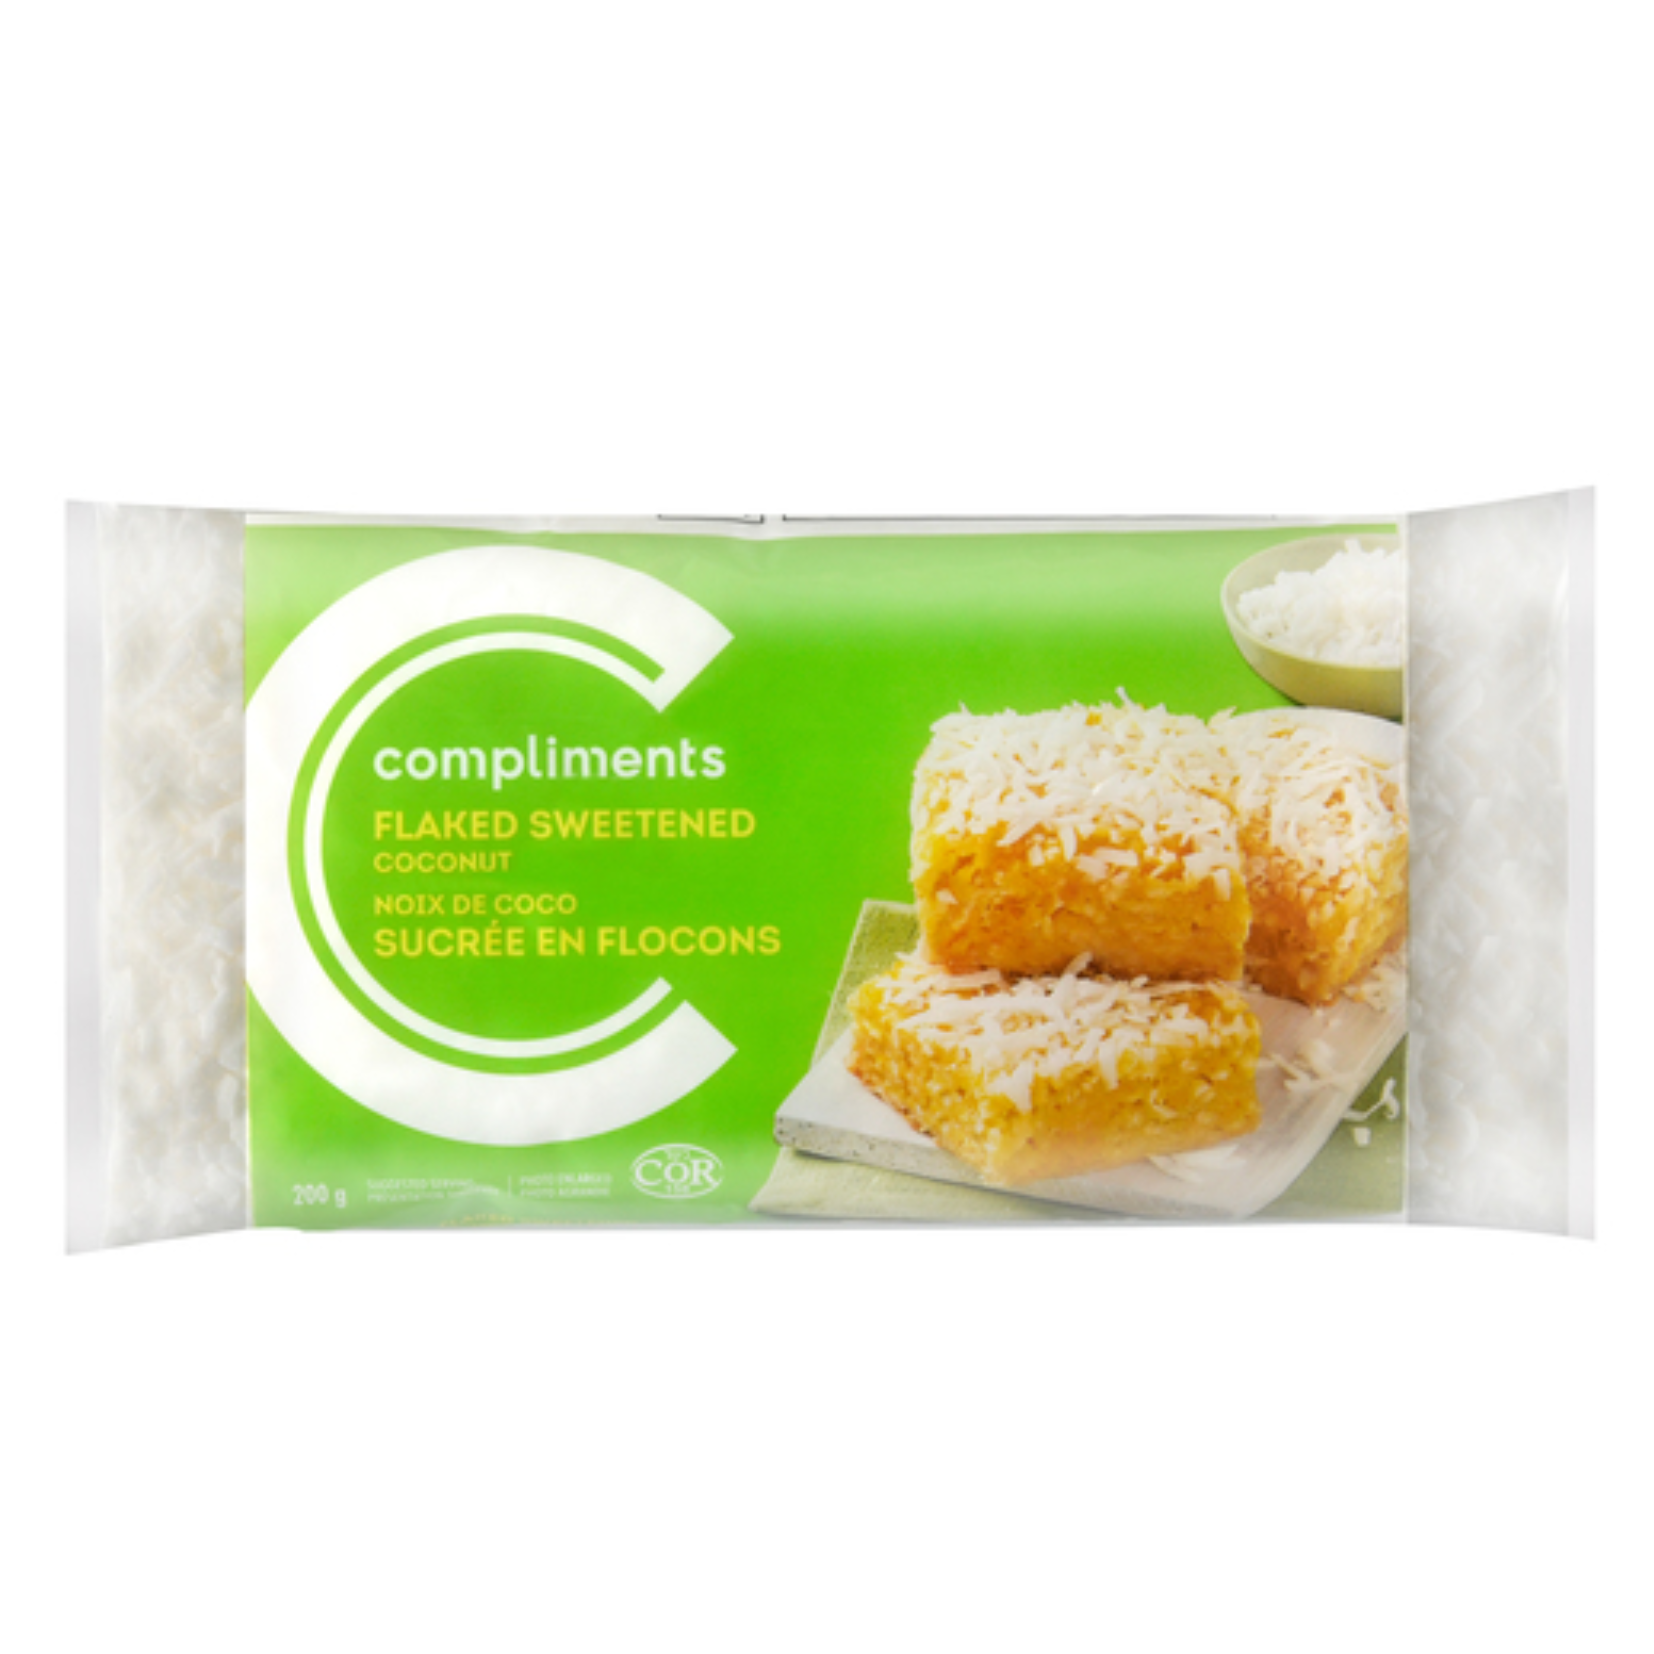 Compliments Flaked Sweetened Coconut 200g